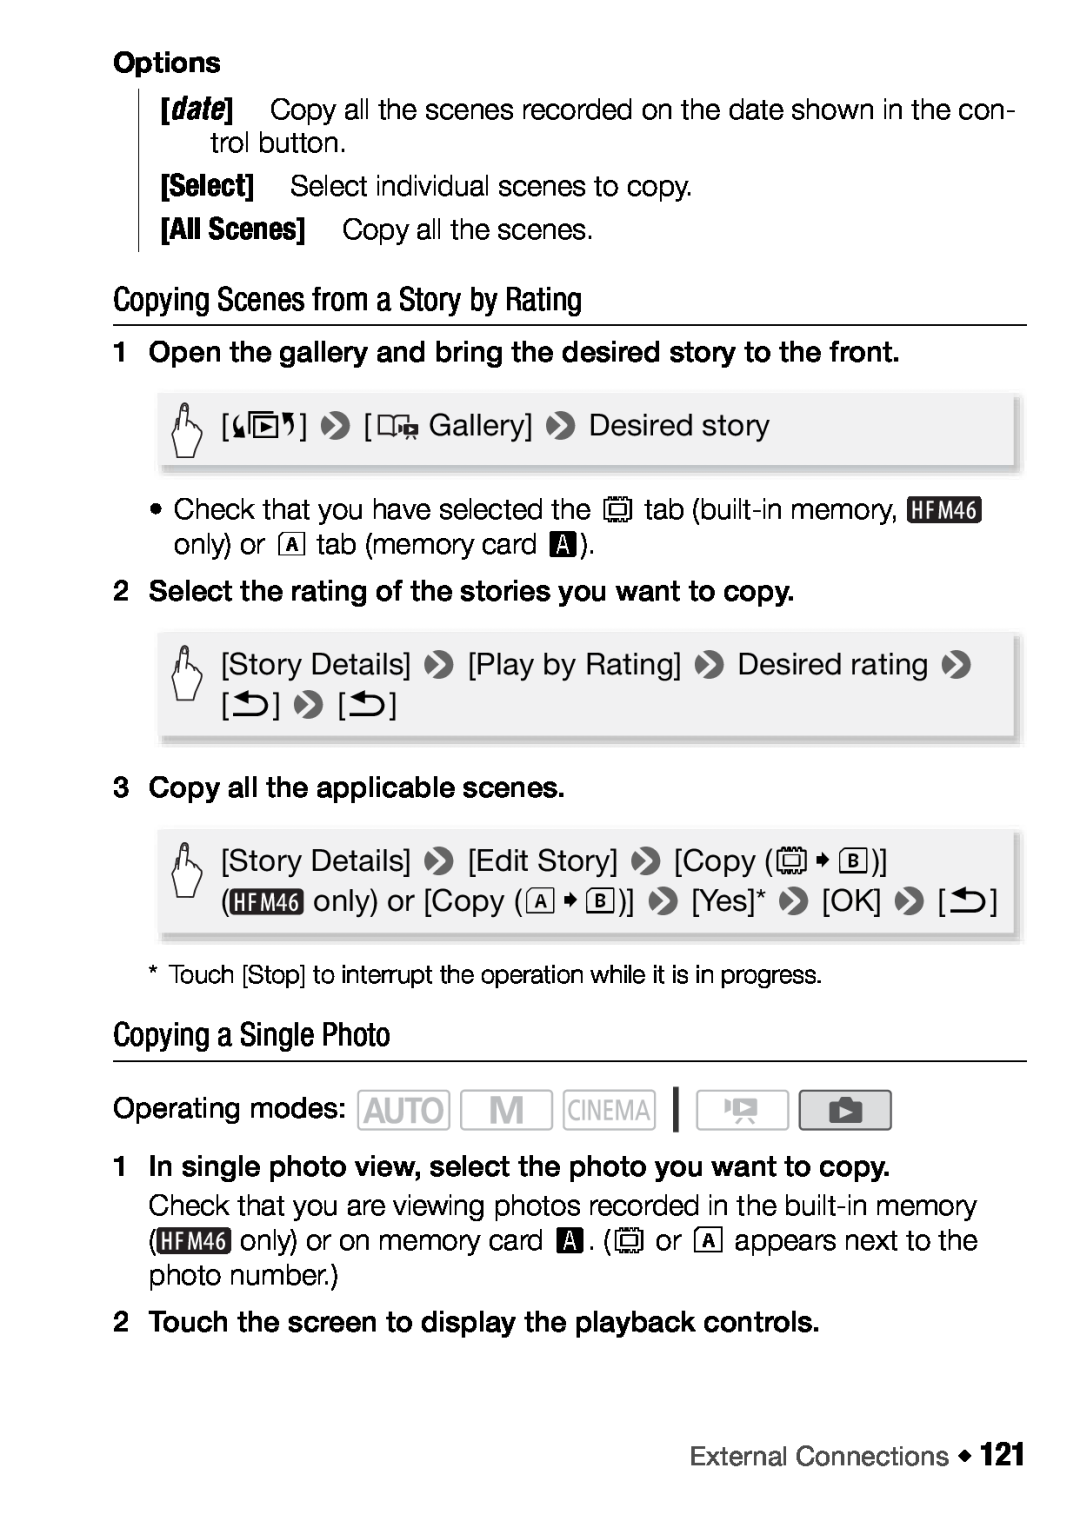 Canon HFM46, HFM406 instruction manual Copying Scenes from a Story by Rating, Copying a Single Photo, Options 